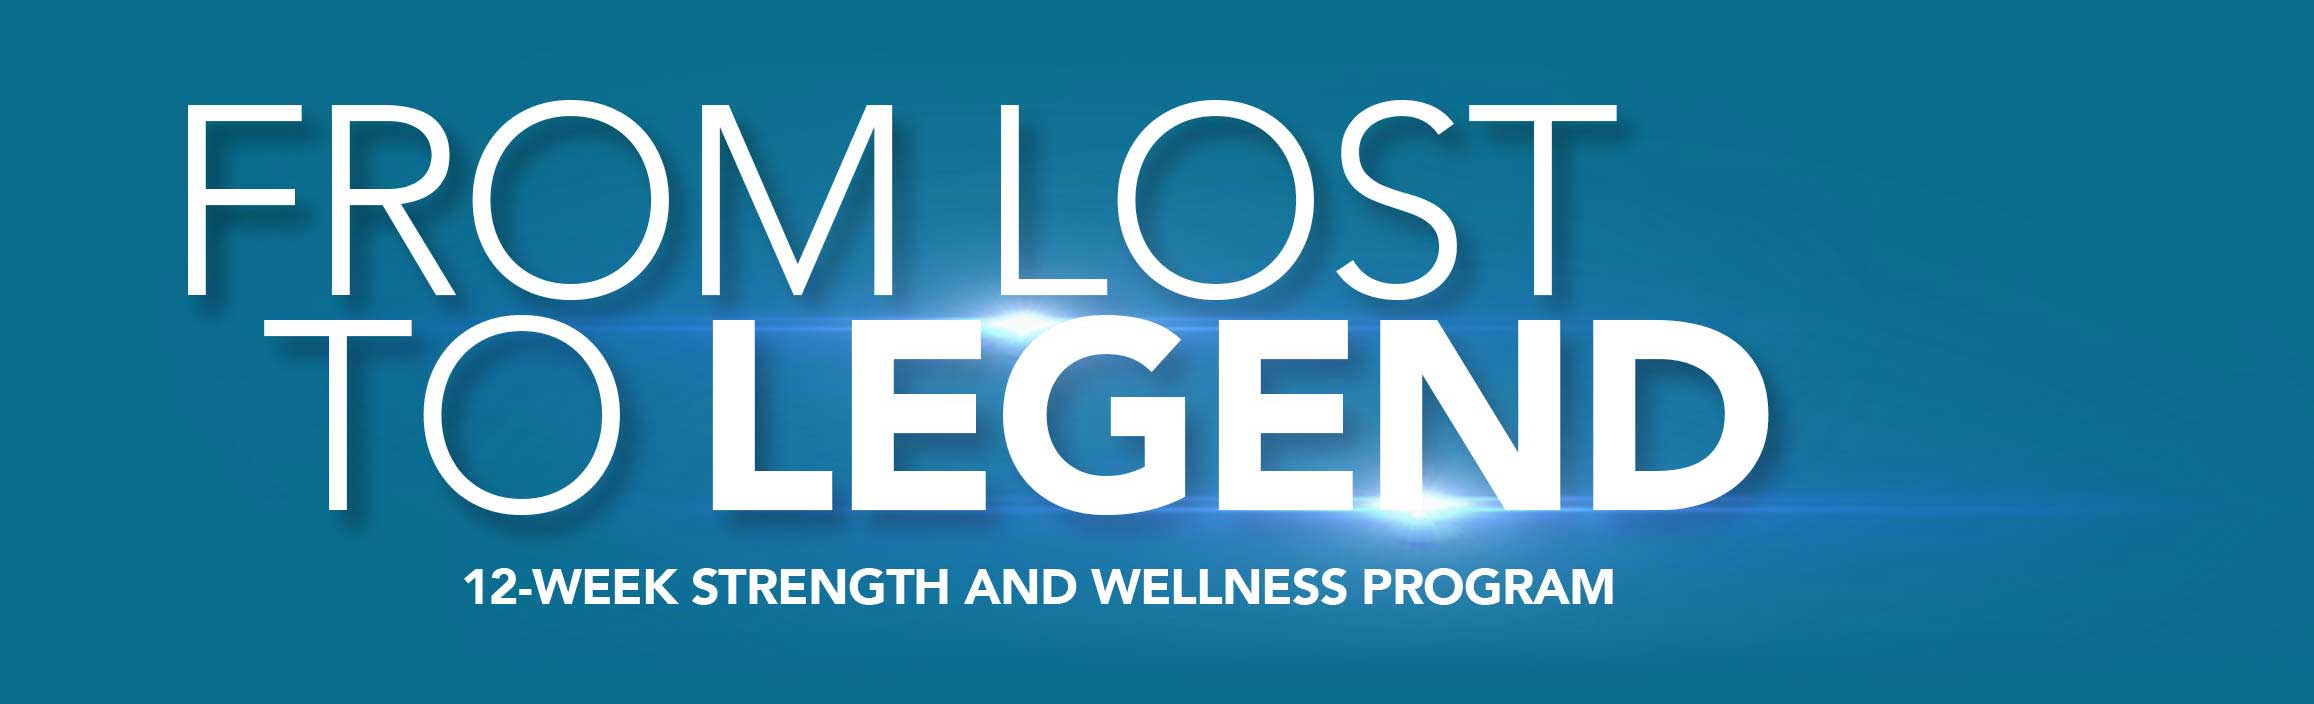 From Lost to Legend - 12 week strength to wellness program - Isaac Xavier